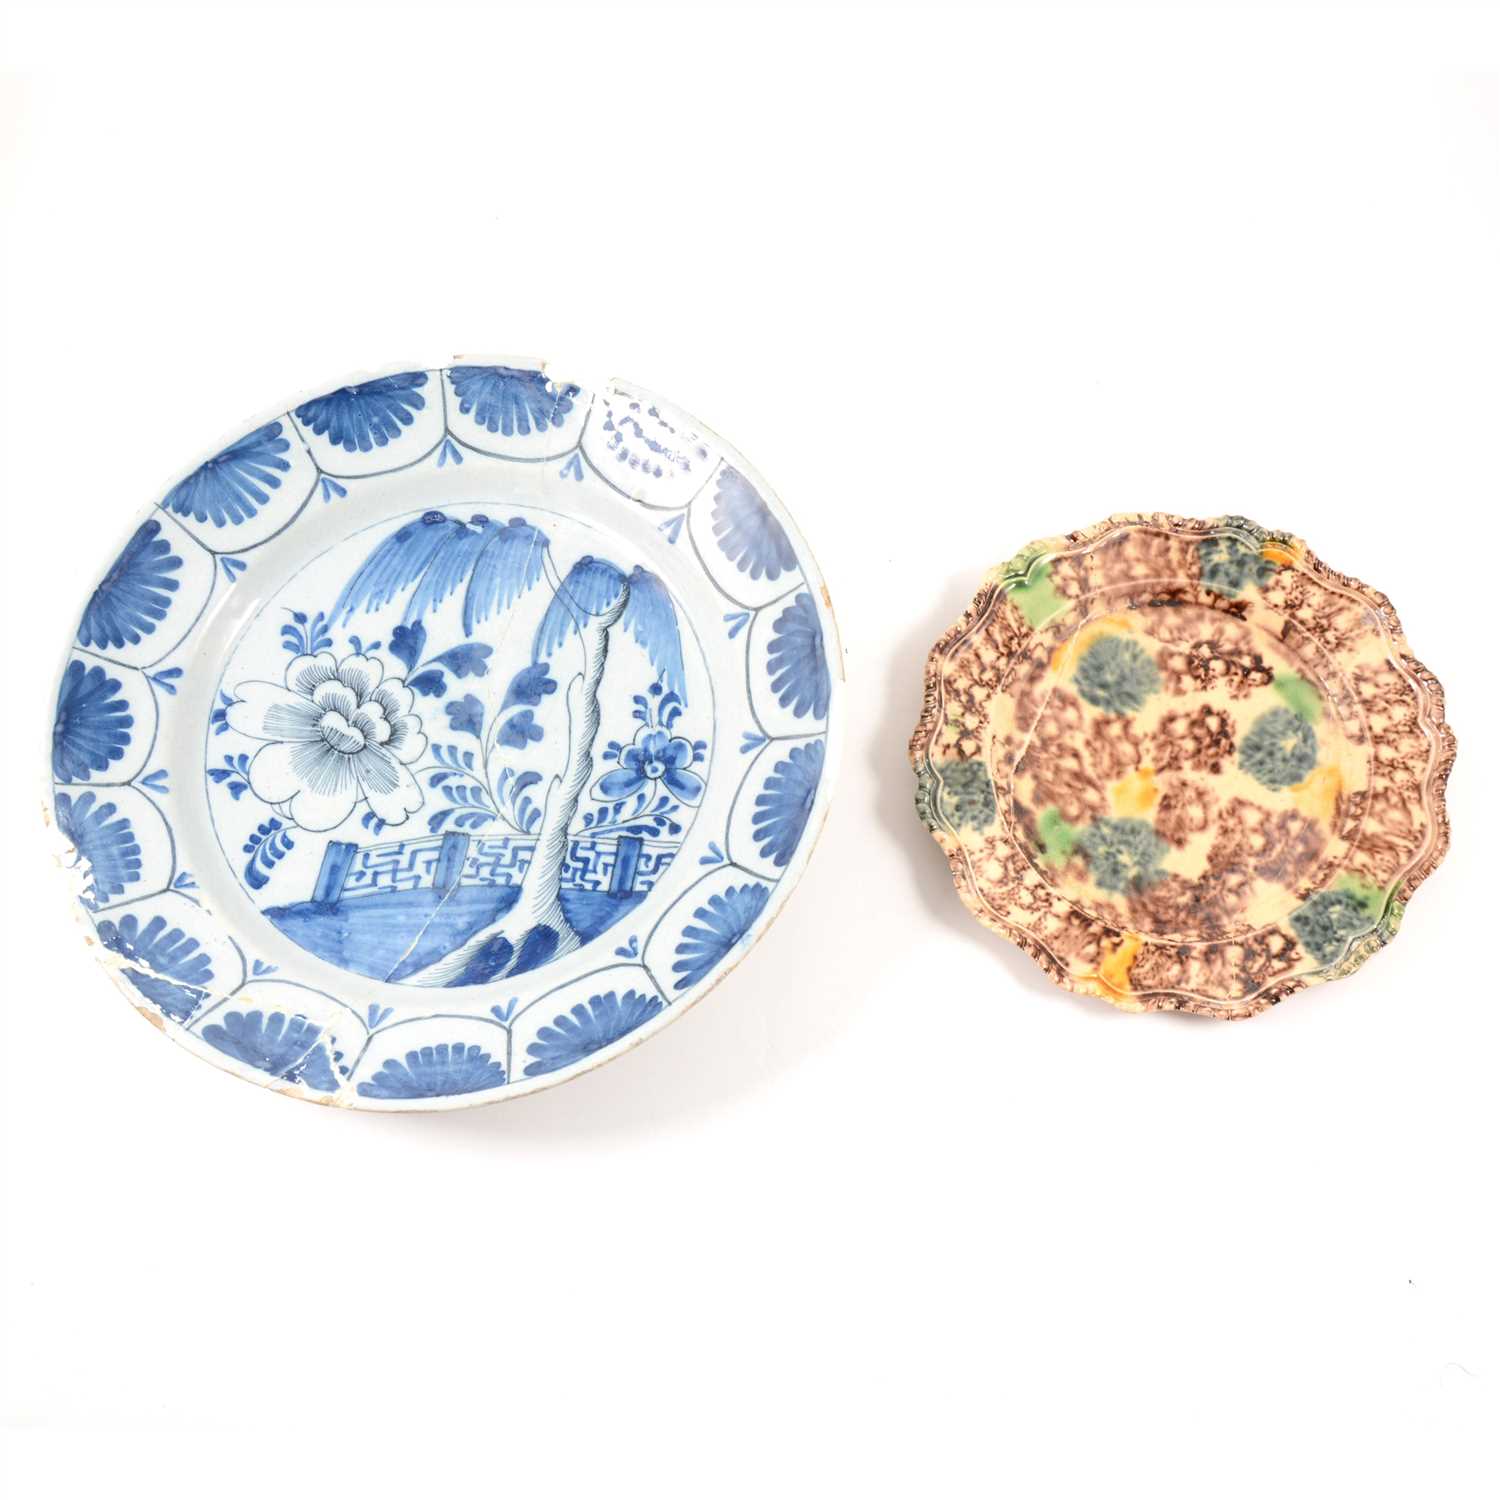 Lot 7 - Whieldon type creamware plate, mid 18th Century, and a Delft dish